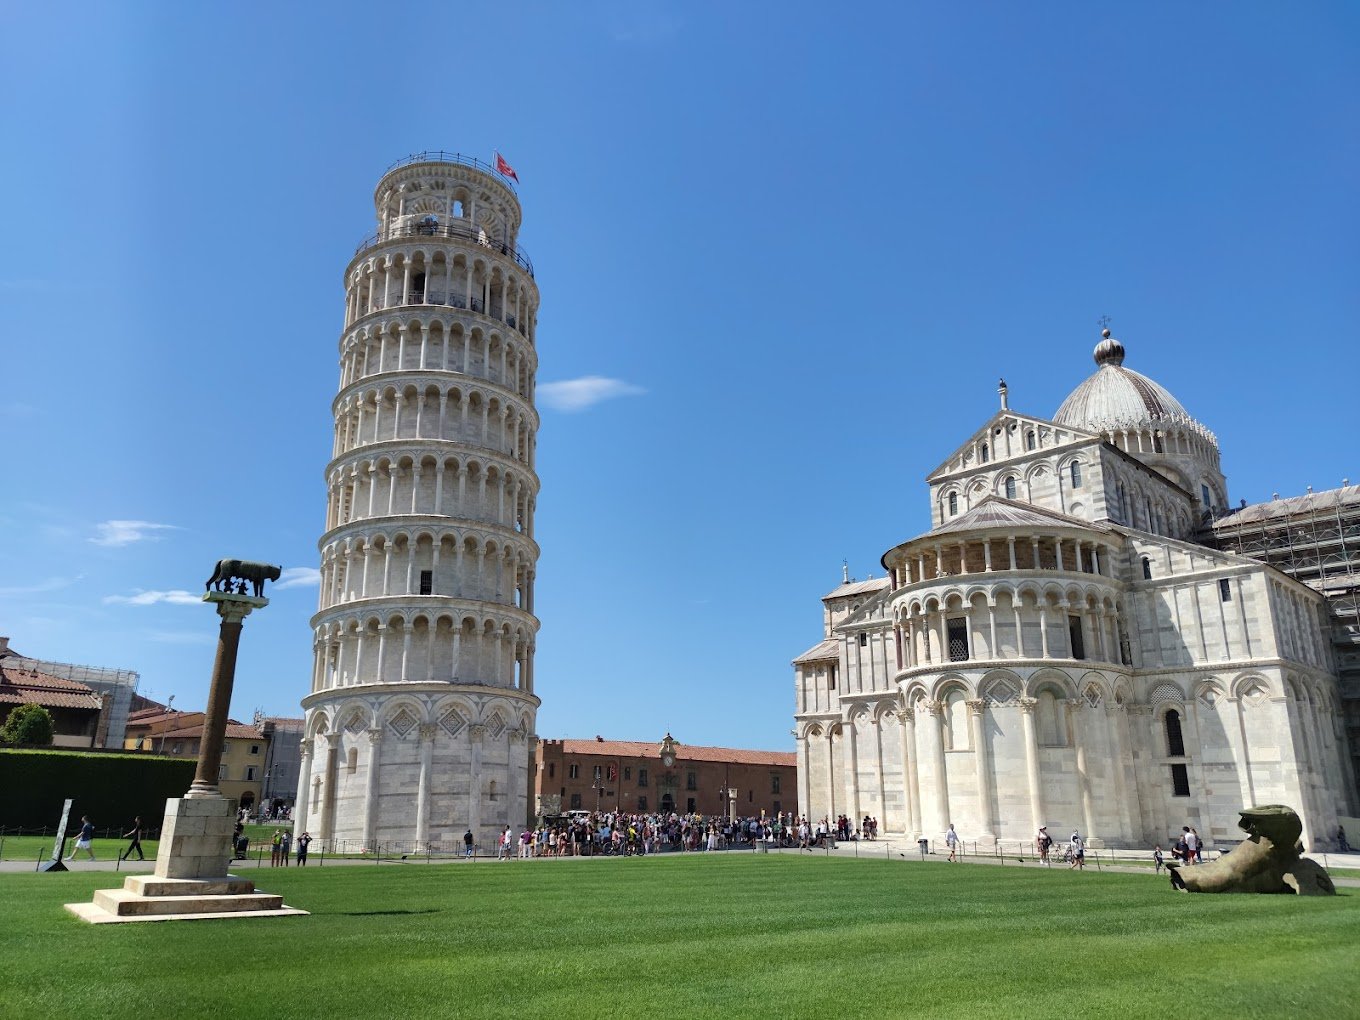 Day 13: Guided walking city tour of Florence. View the remarkable and famous Leaning Tower of Pisa.